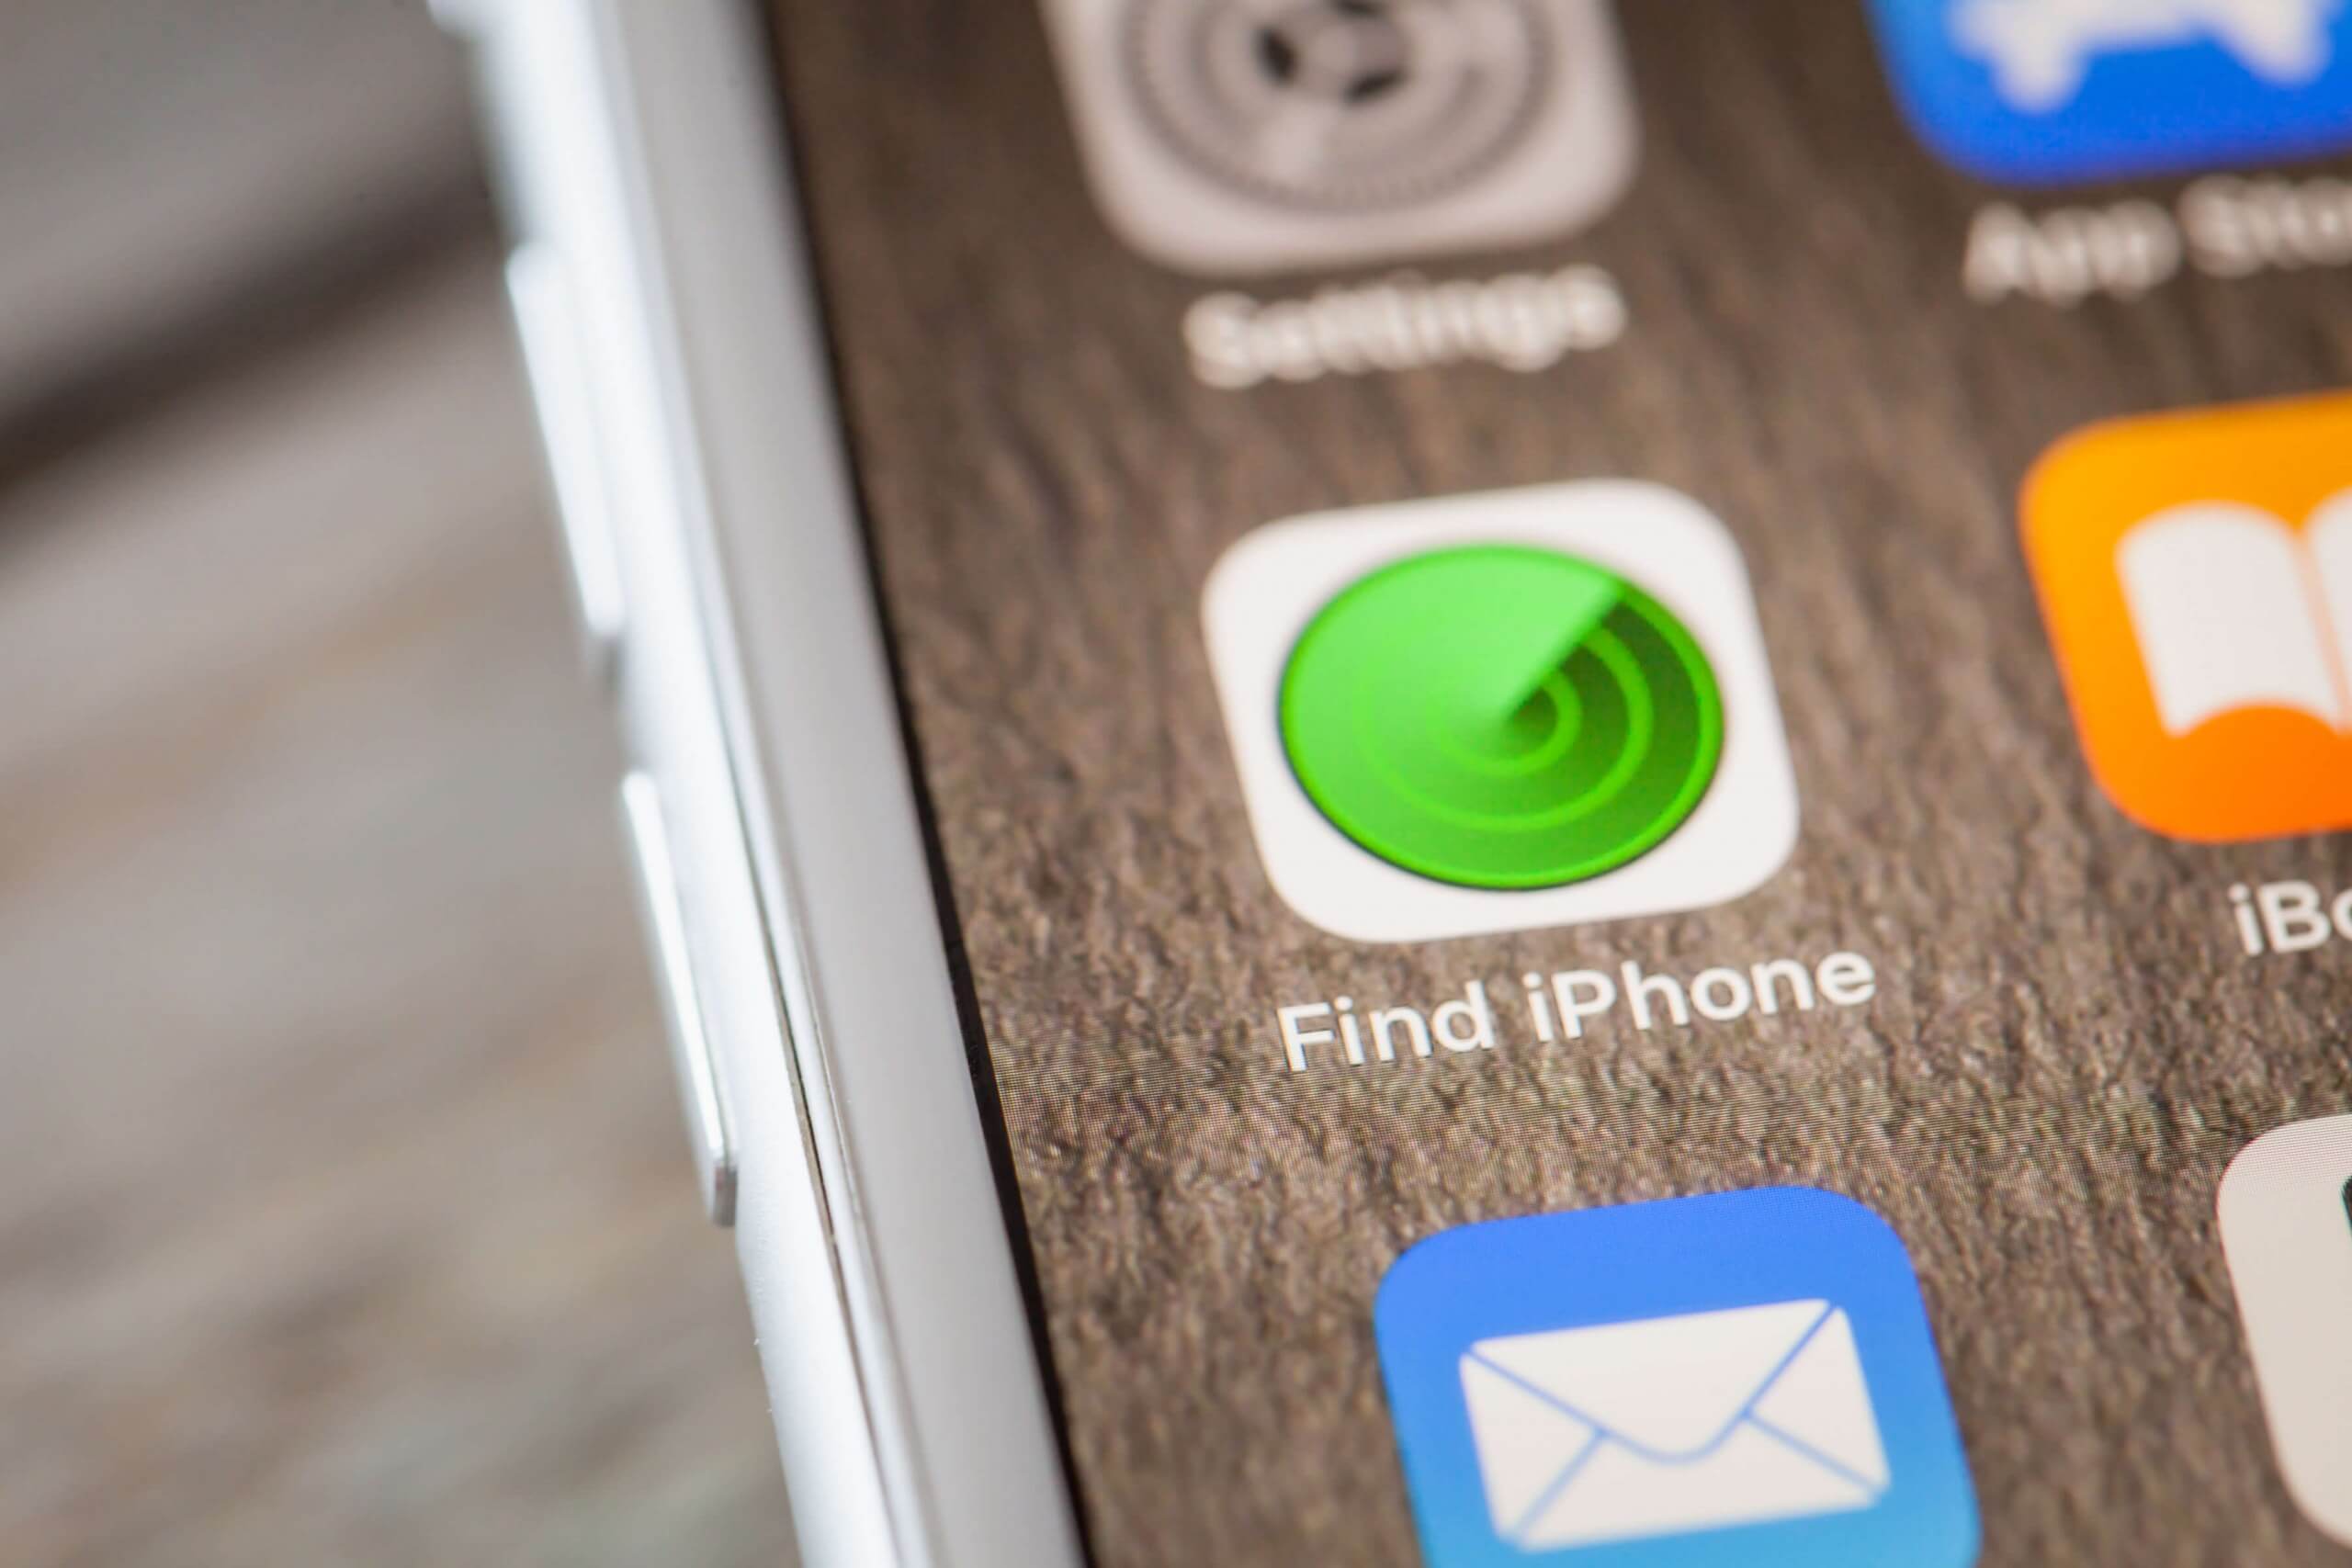 Apple AirTags tracking device name spotted in iOS support video